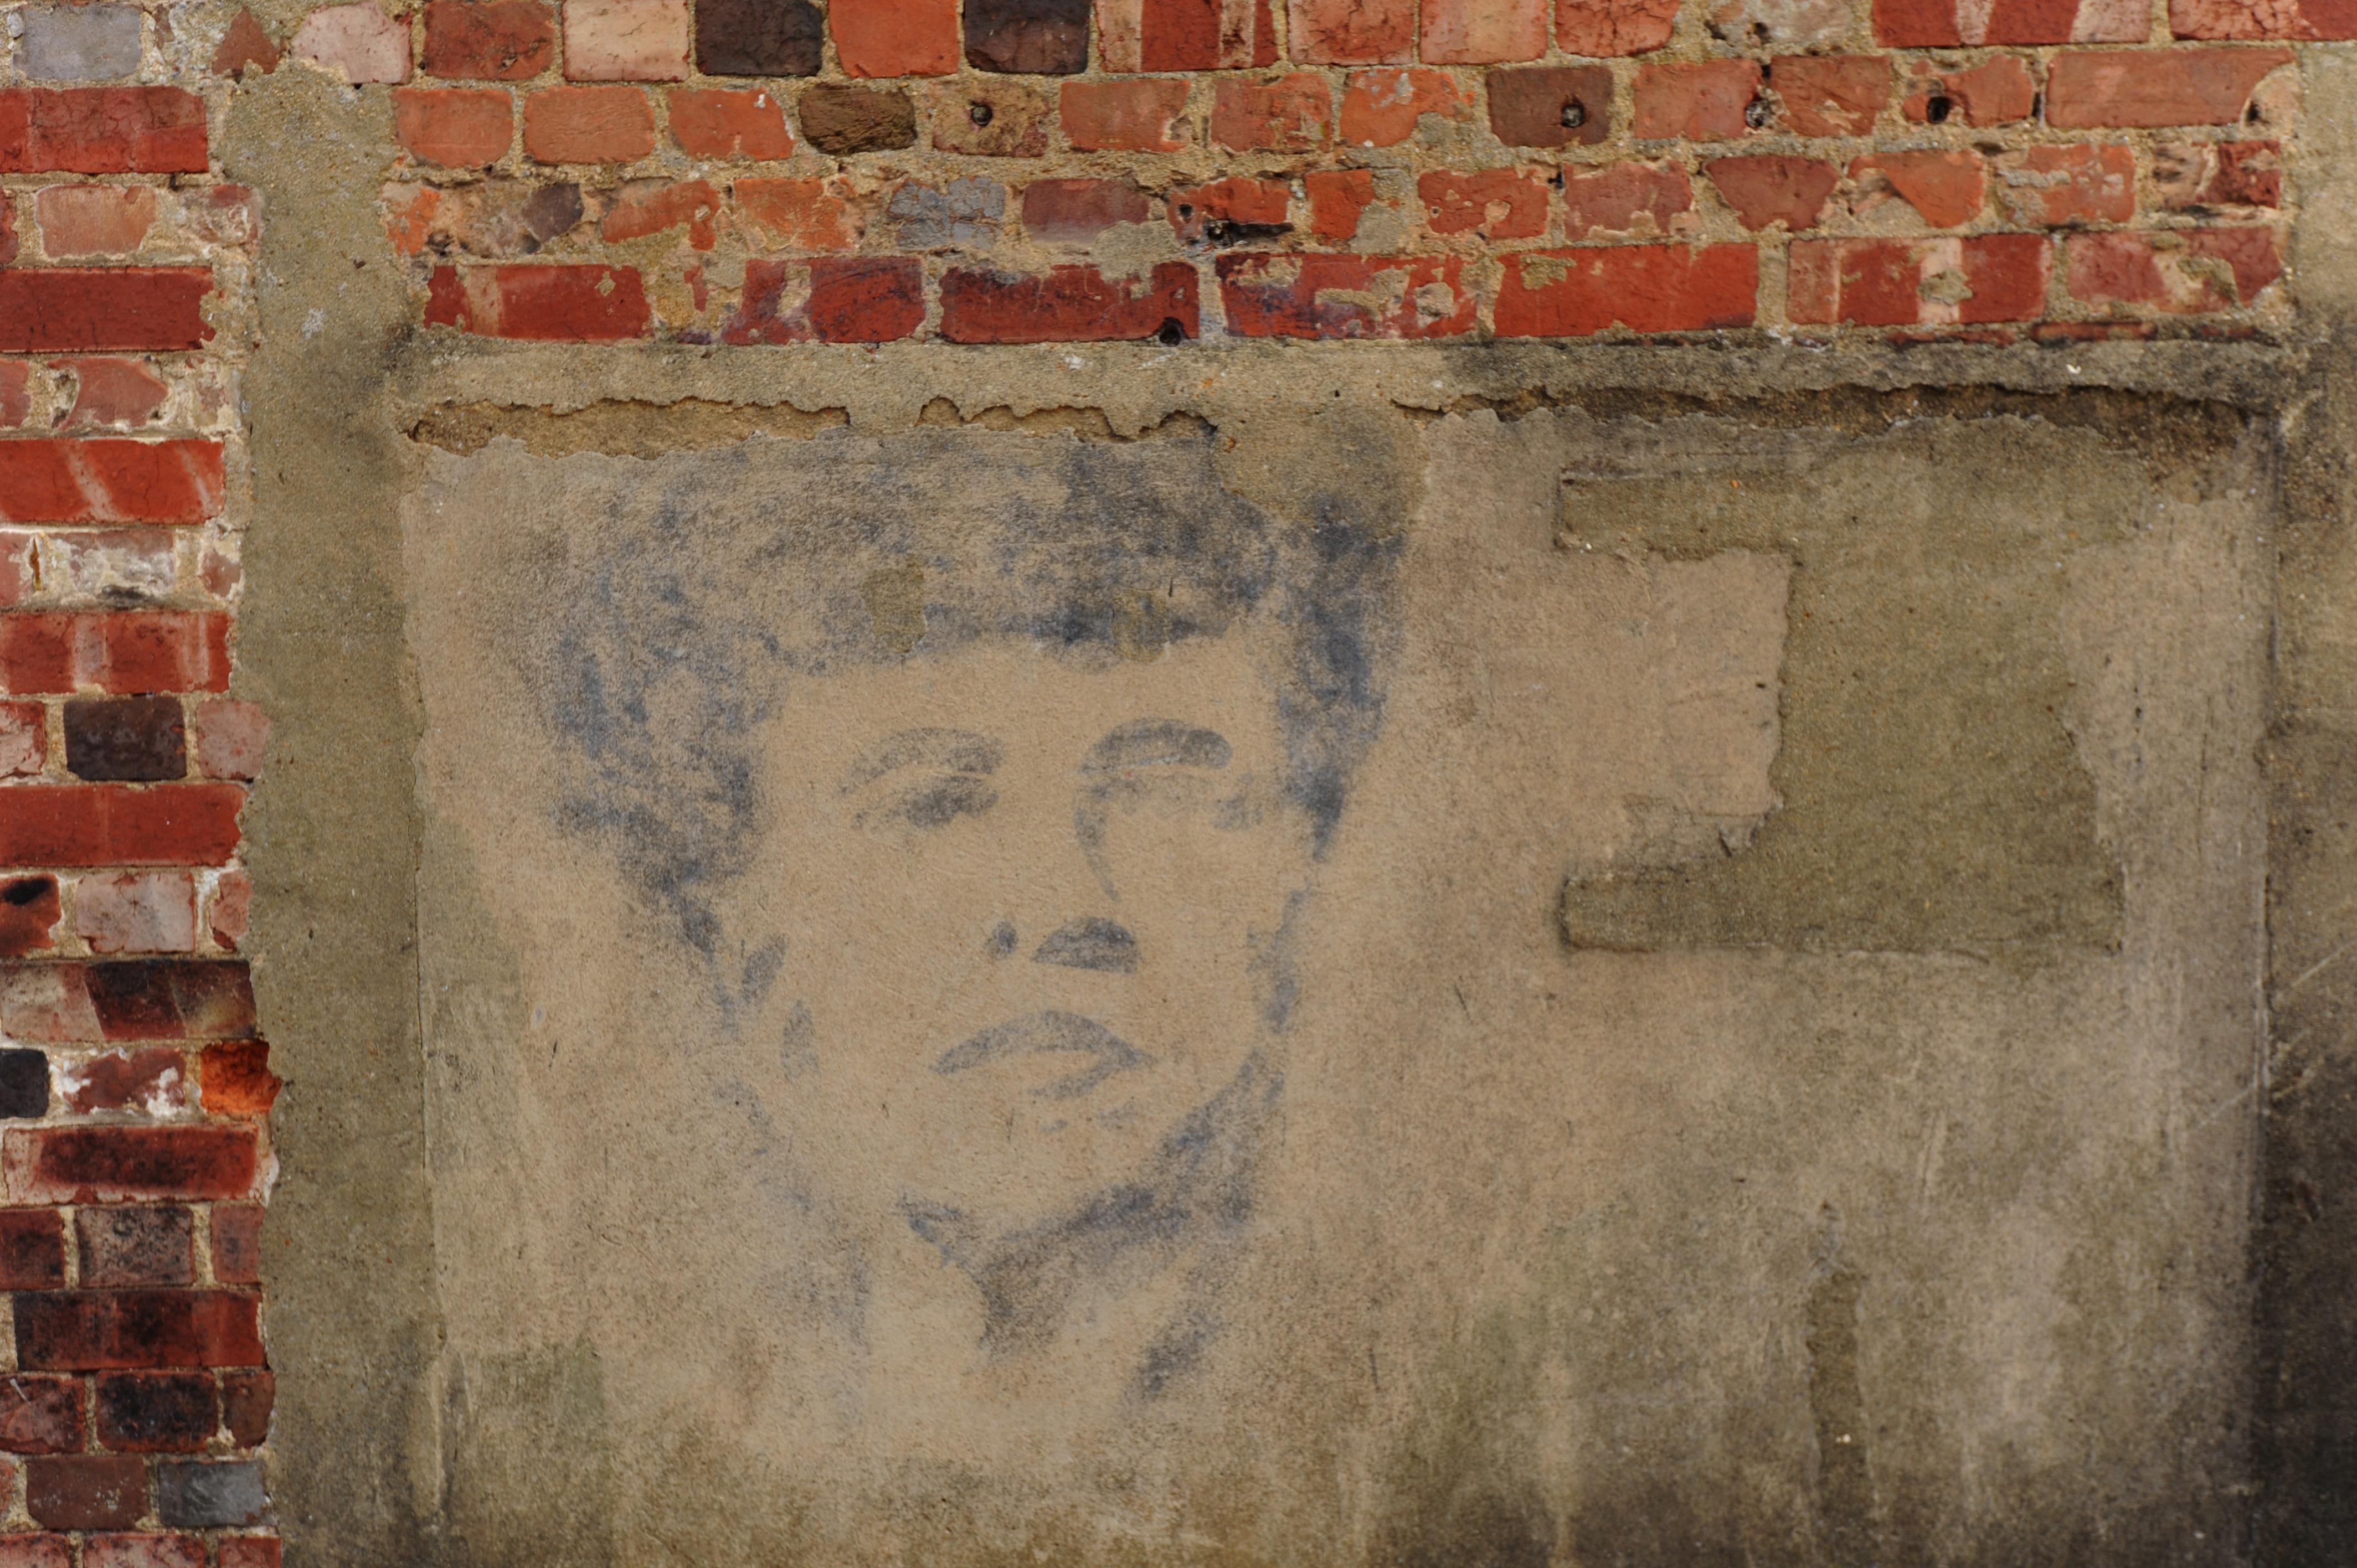 Not so obvious - A faded art piece on one of the run down buildings in the City

Picture by Louise Adams C130629-5 Ent Street Art ENGSUS00120130705105505